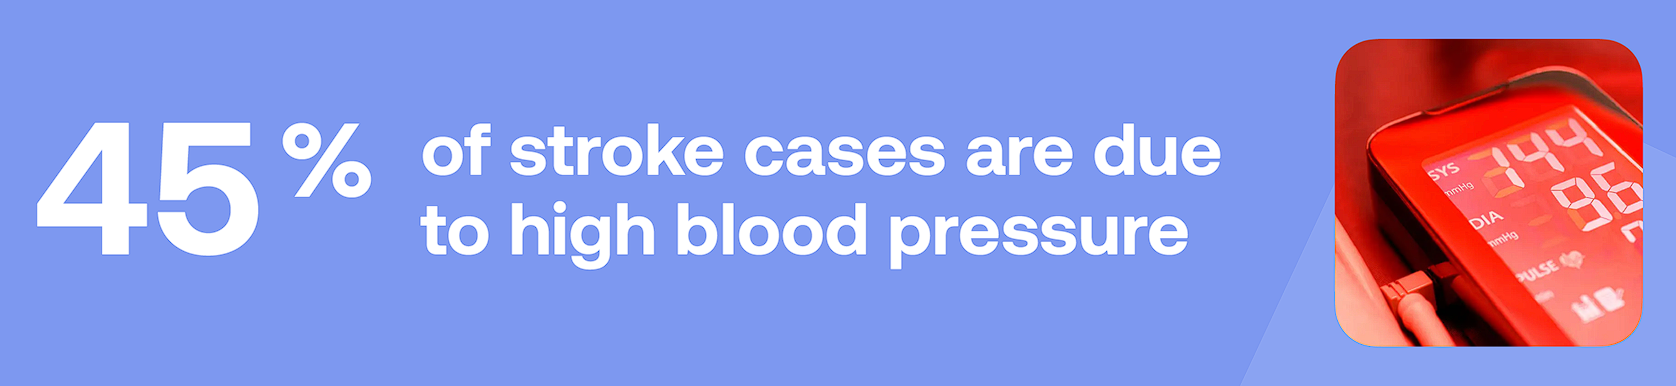 45% of stroke cases are due to high blood pressure